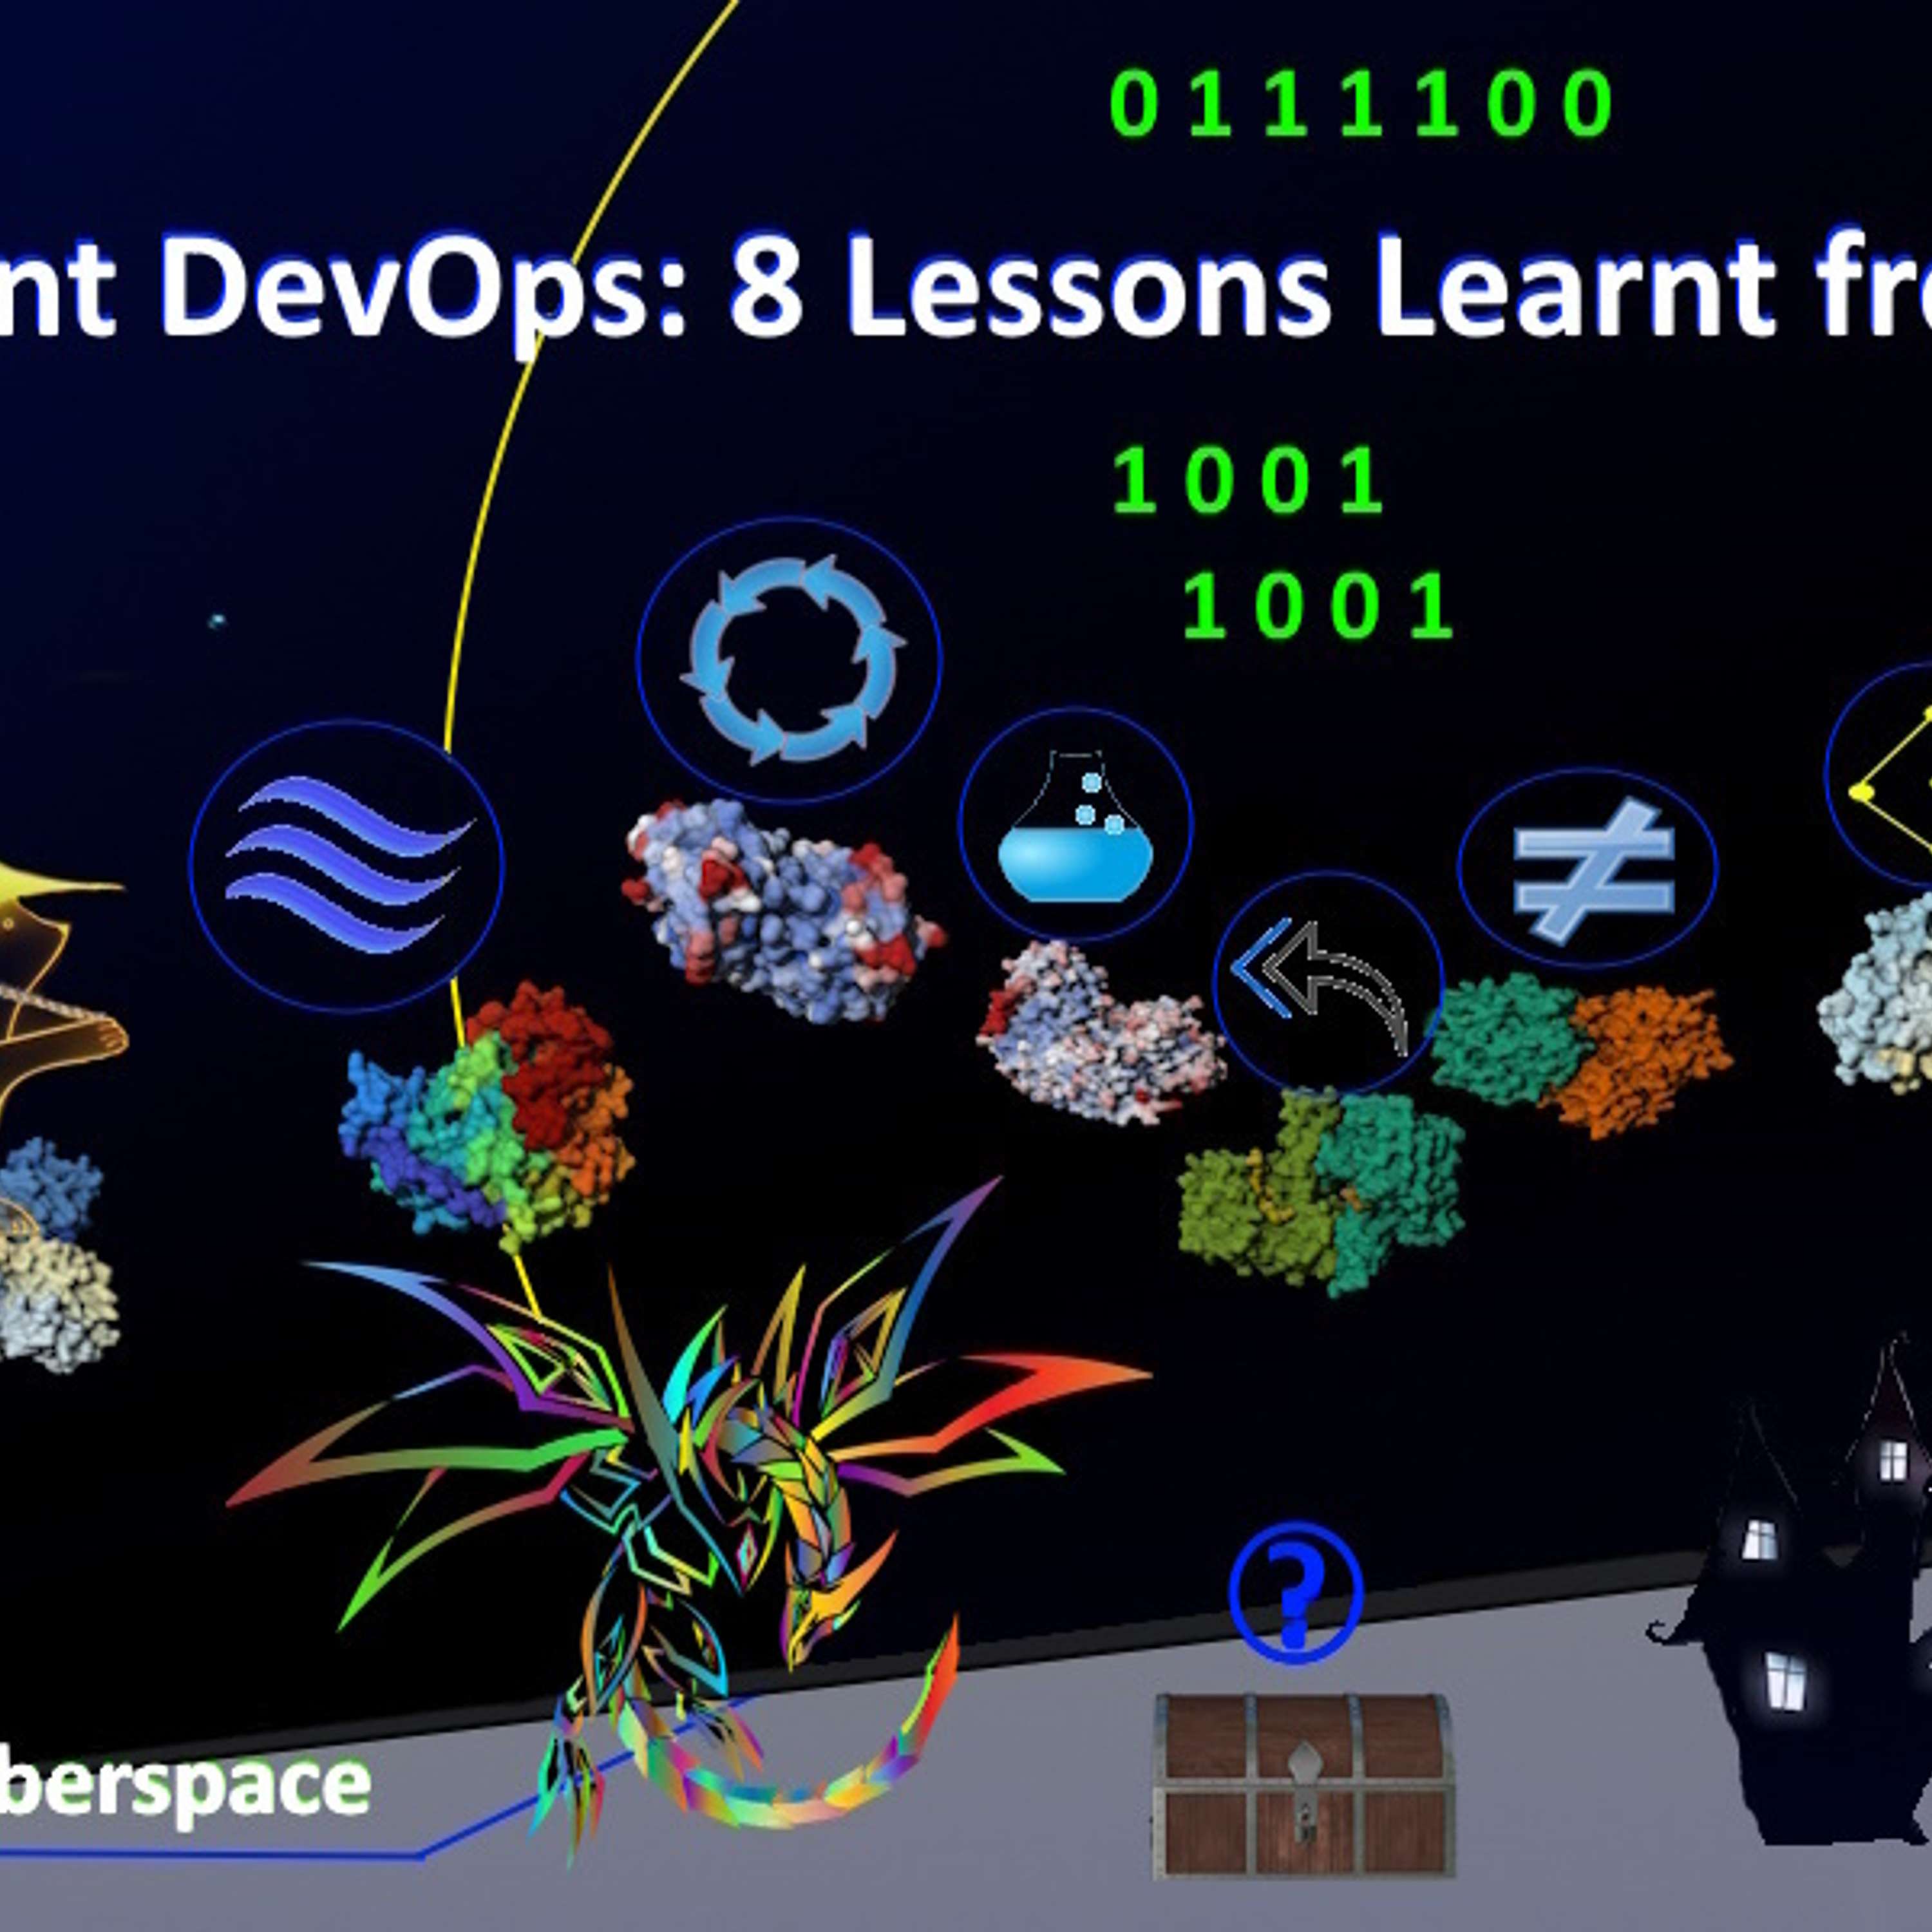 Intelligent DevOps: 8 Lessons Learned from Nature